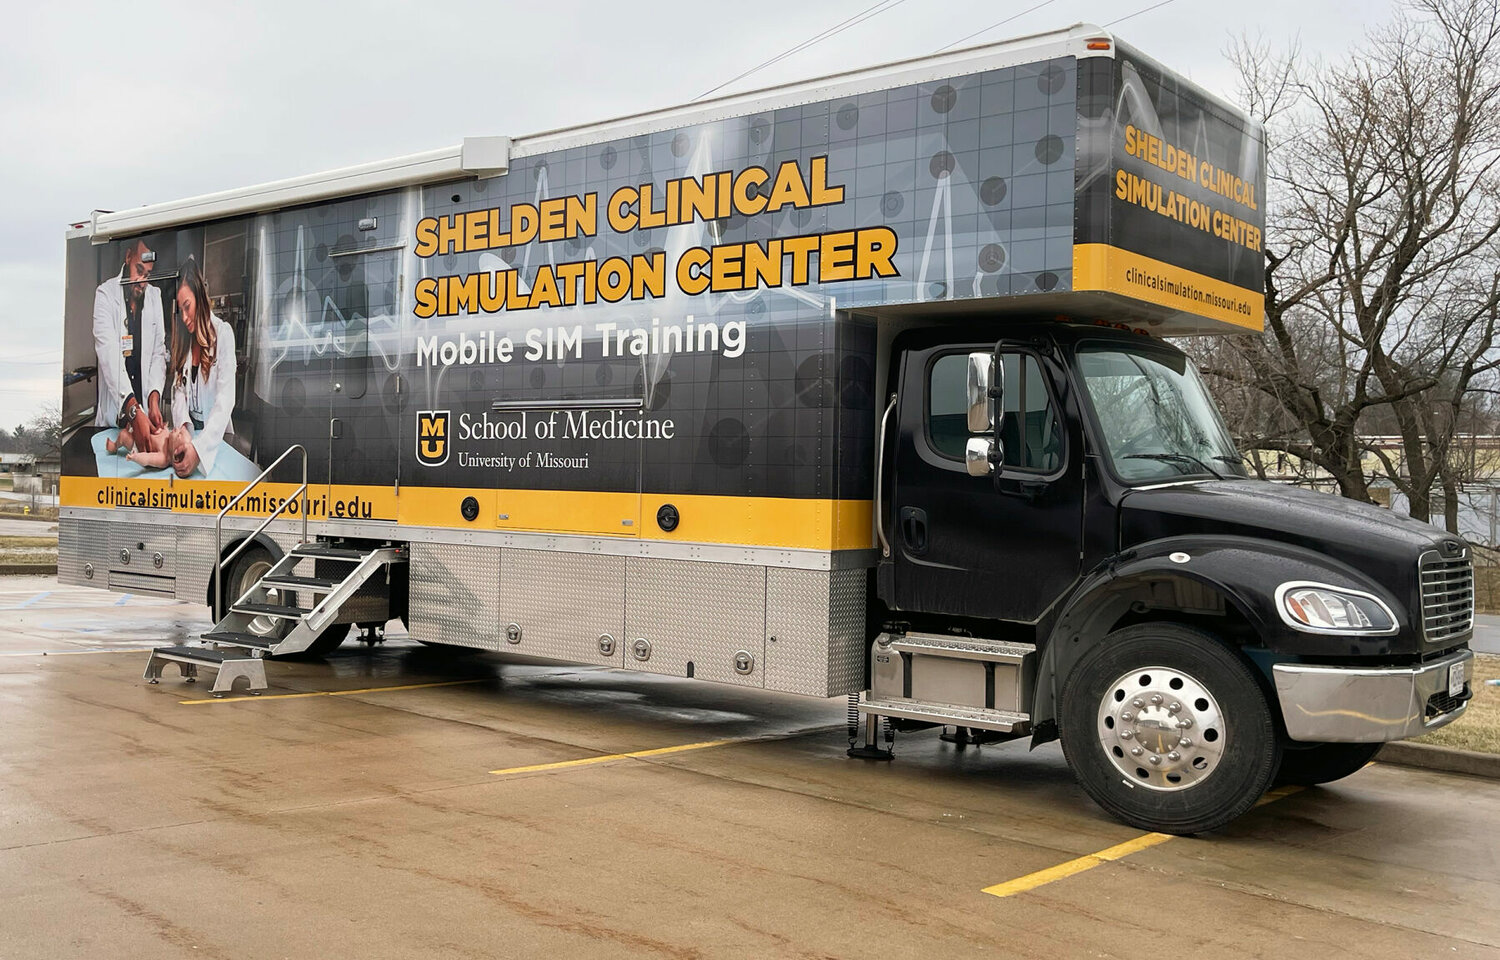 The state-of-the-art mobile simulation unit provided by the University of Missouri School of Medicine and the University of Missouri Extension, will travel through rural Missouri training first responders and emergency technicians.